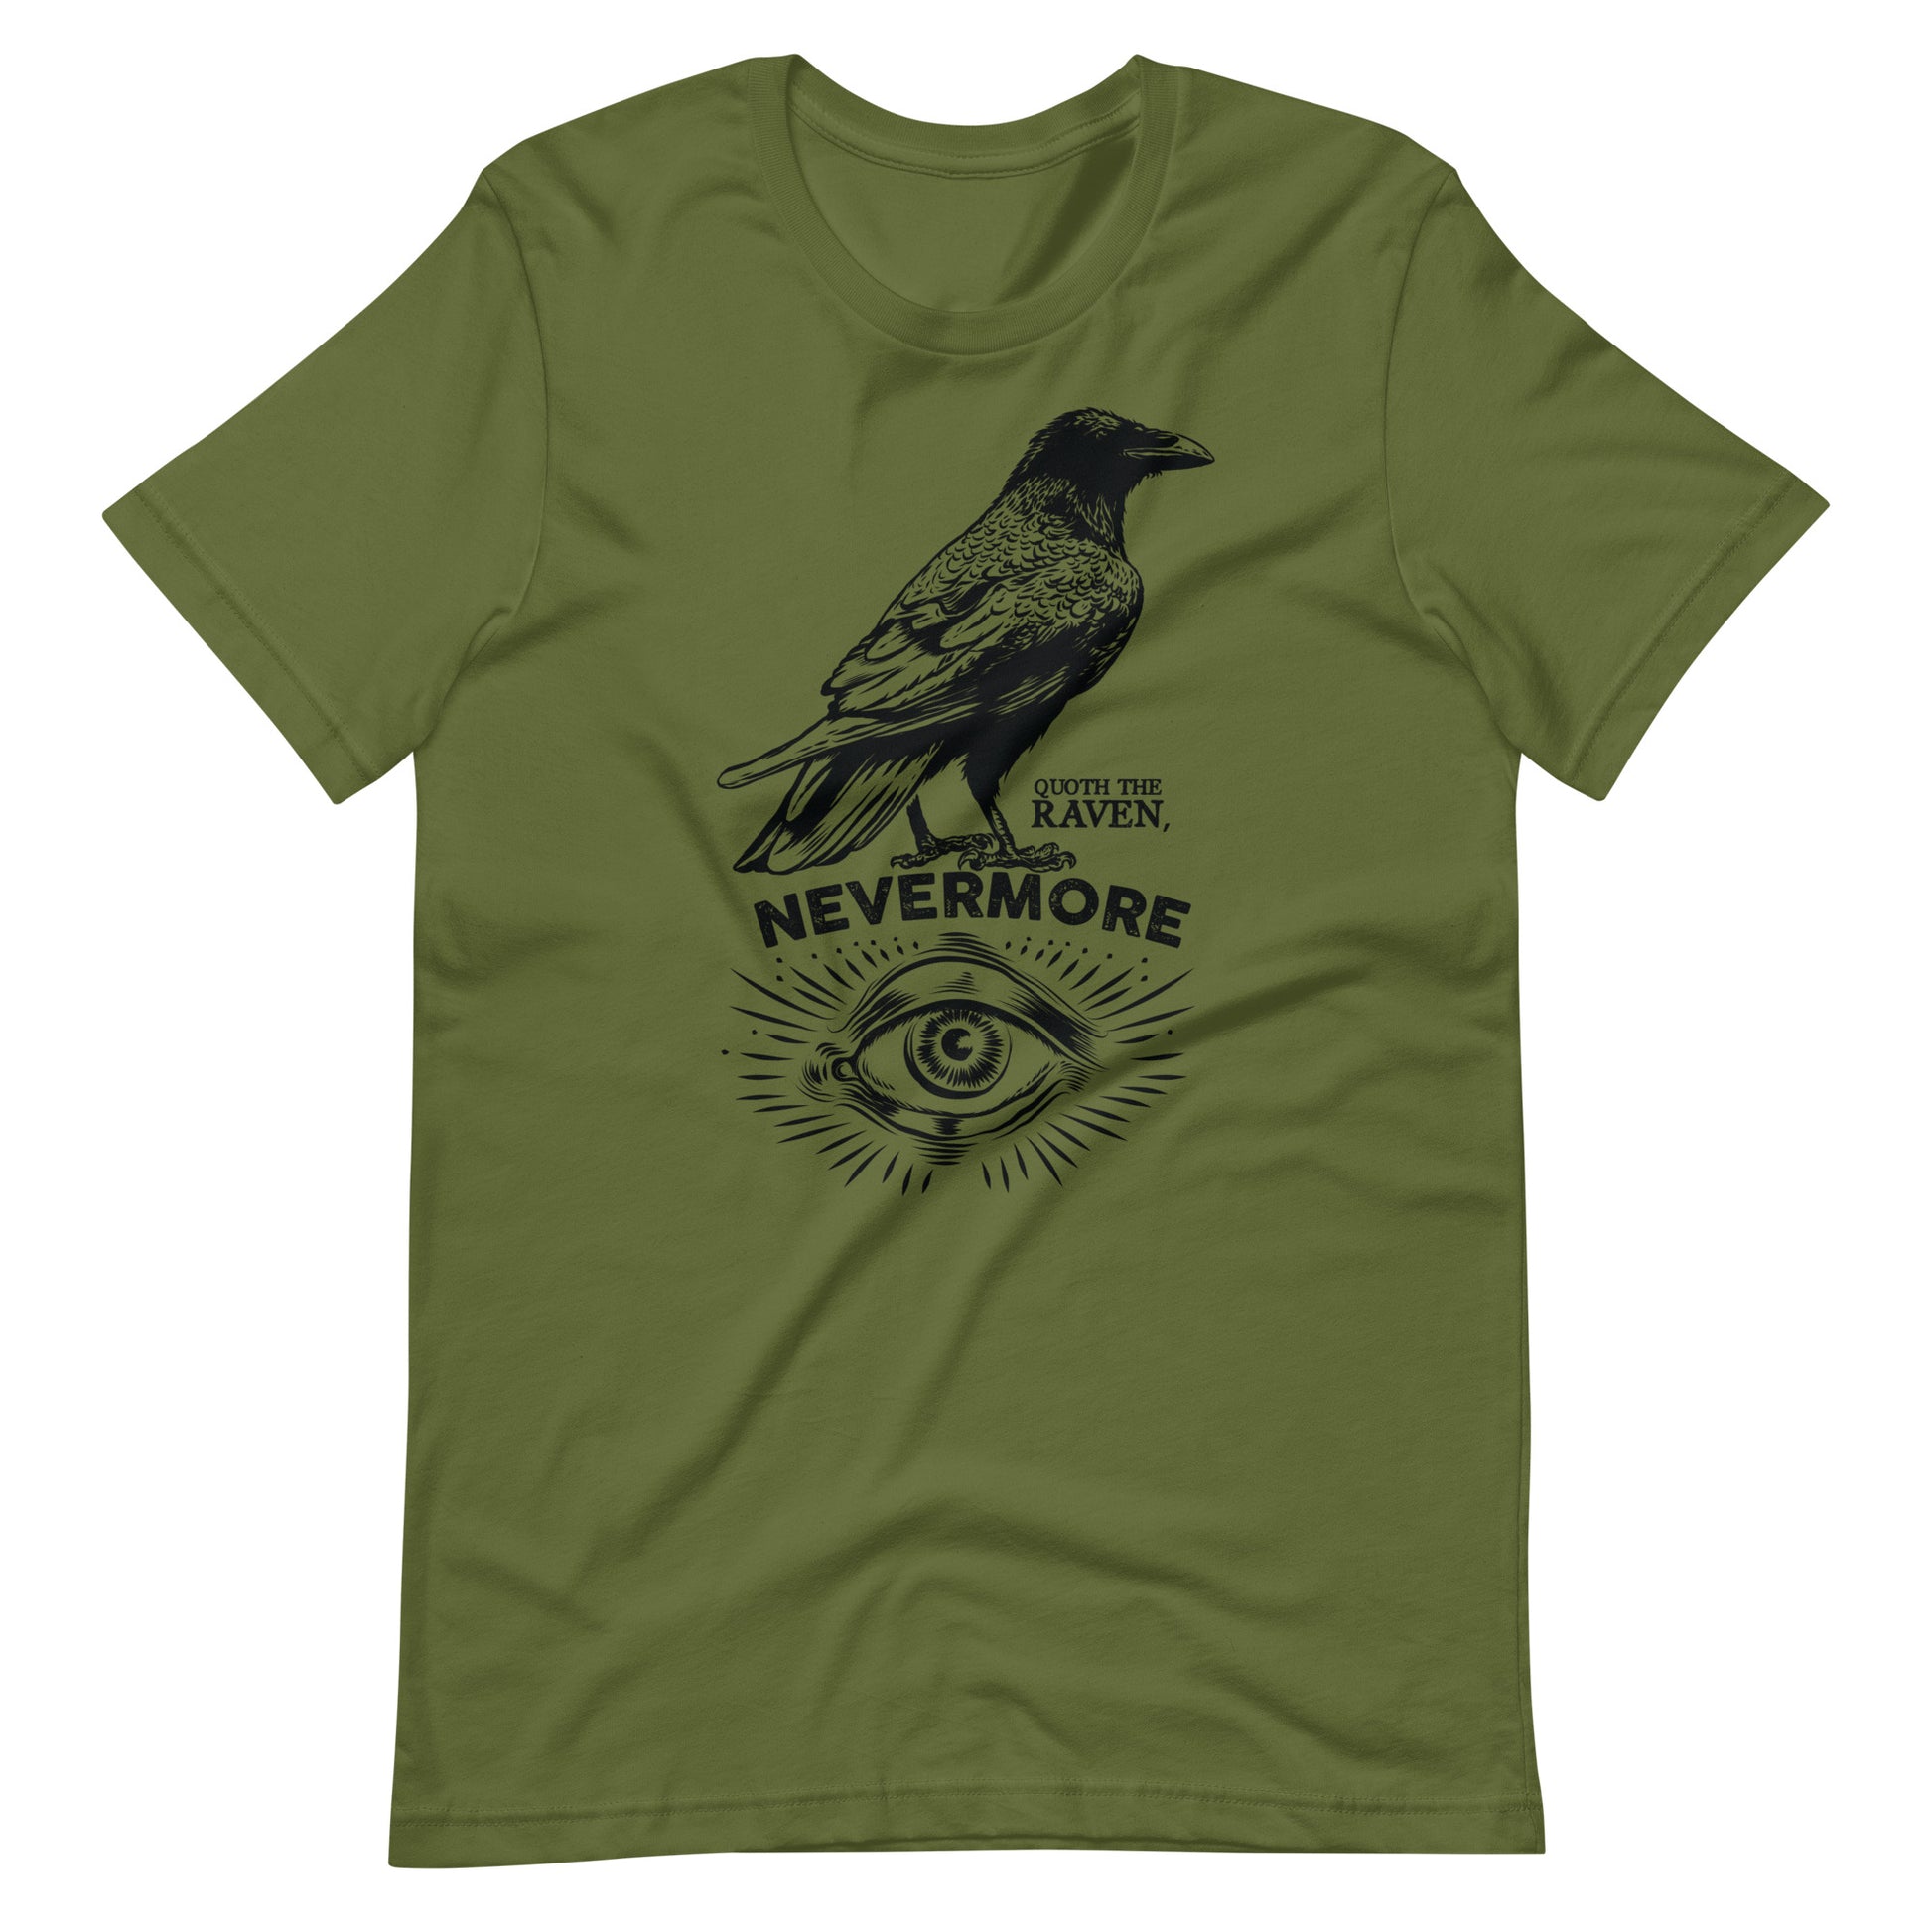 Quoth the Raven Nevermore - Men's t-shirt - Olive Front